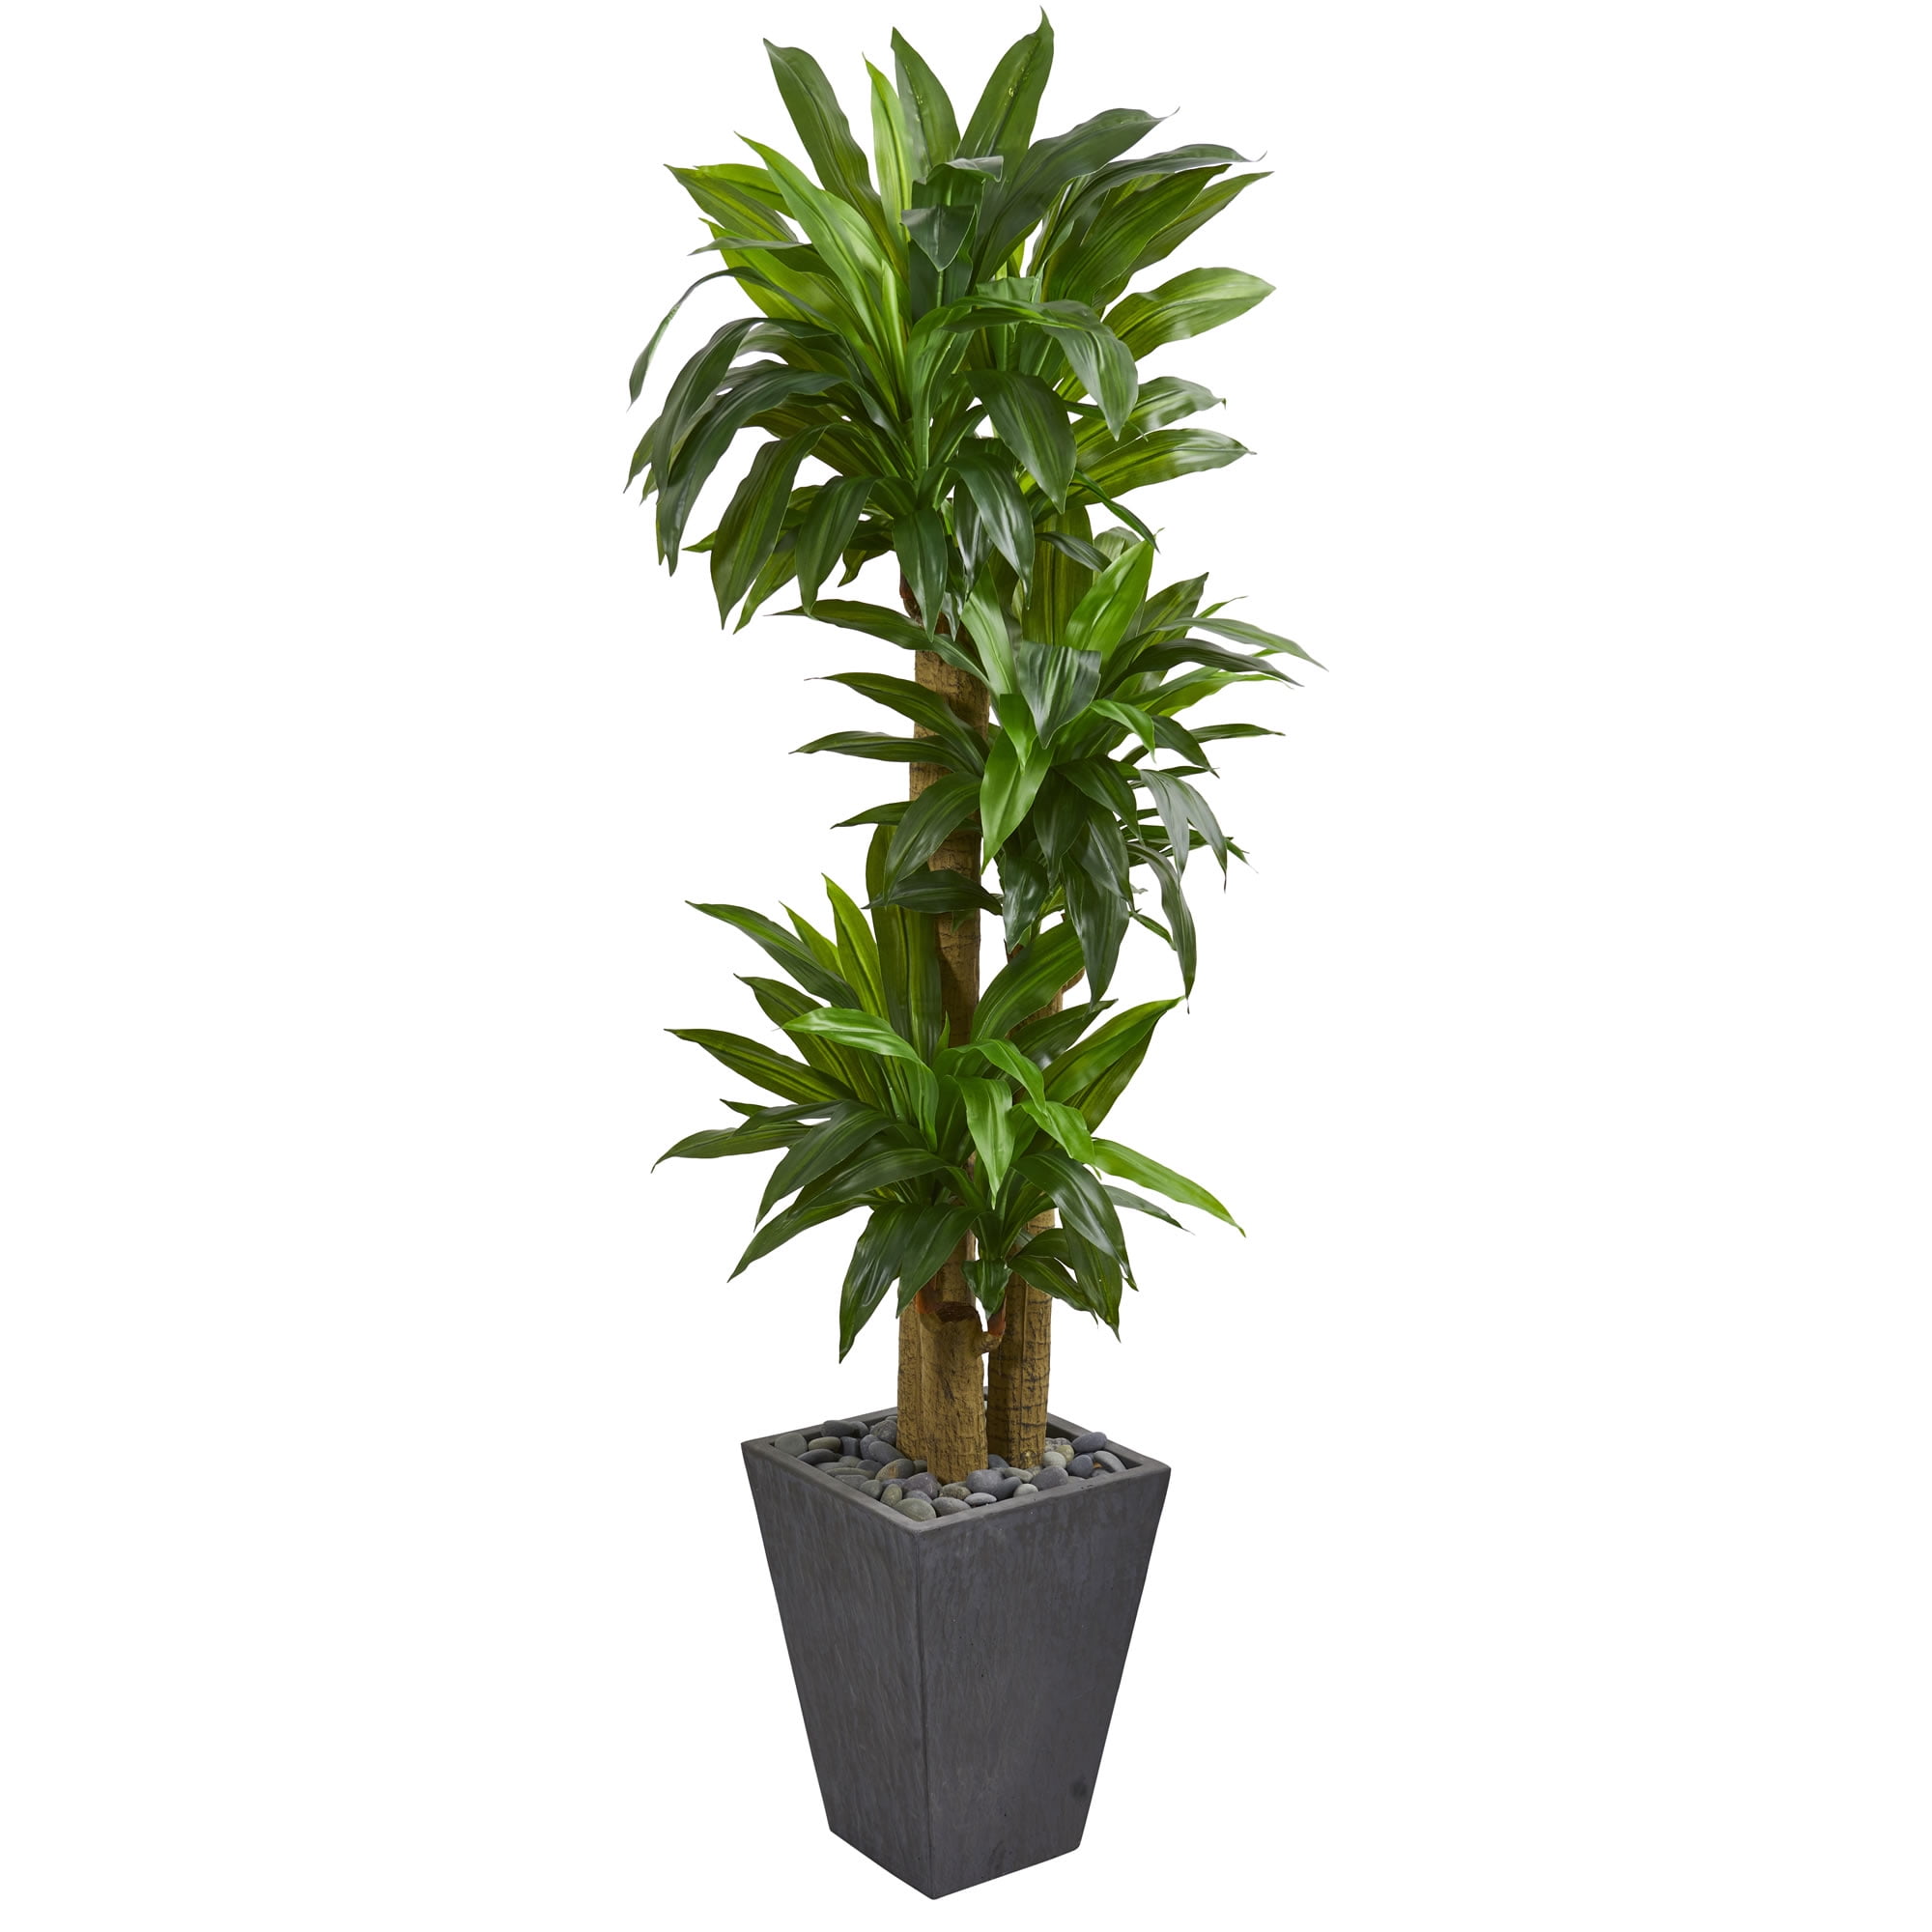 Corn Stalk Dracaena Silk Plant Real Touch Artificial Nearly Natural Home Decor 